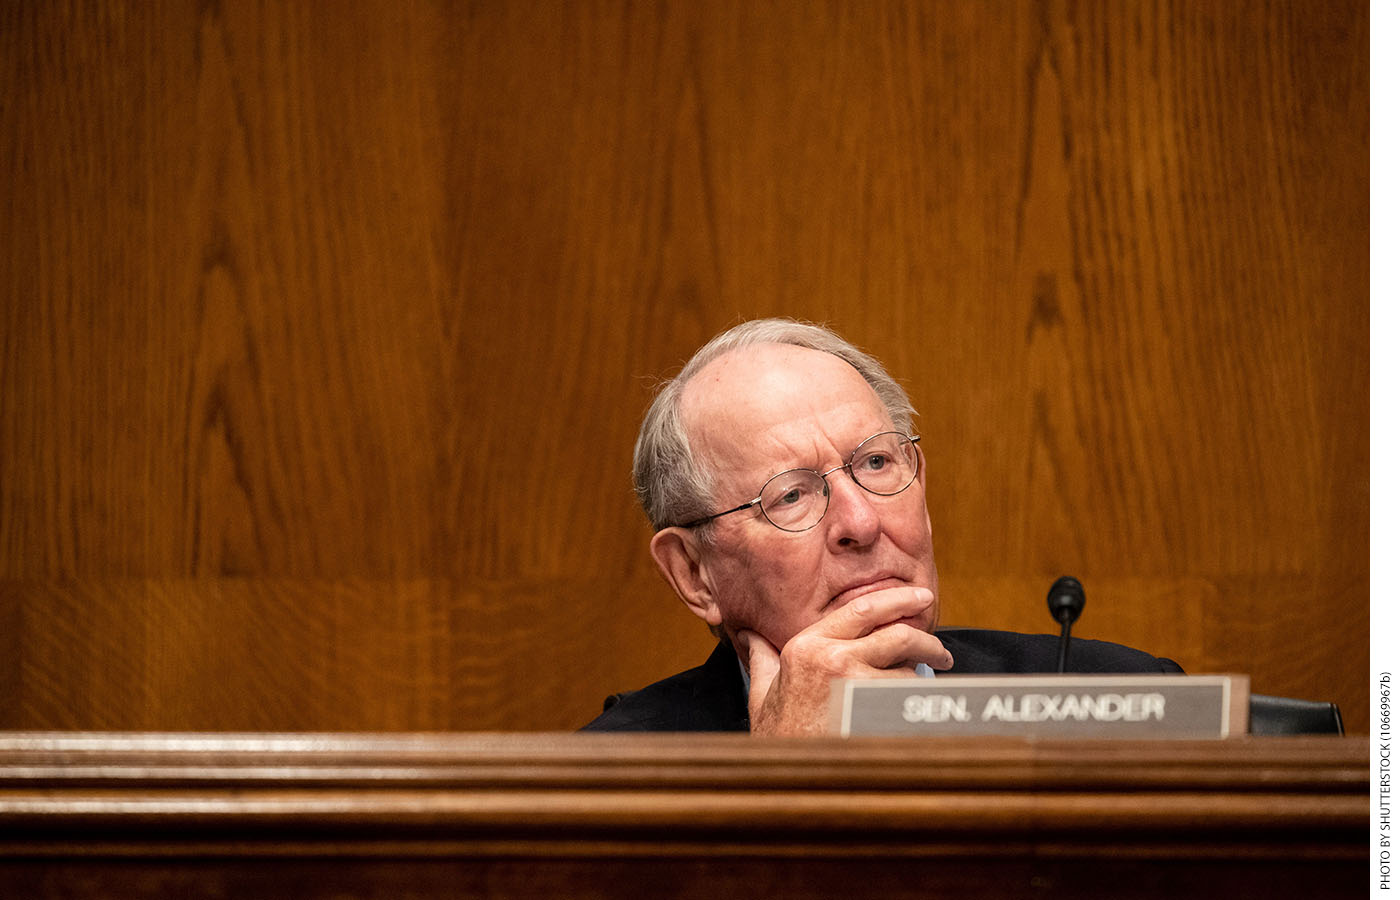 Alexander listens during the “Covid-19: Going Back to School Safely” hearing in his role as chairman of the Health, Education, Labor, and Pensions Committee, June 4, 2020.